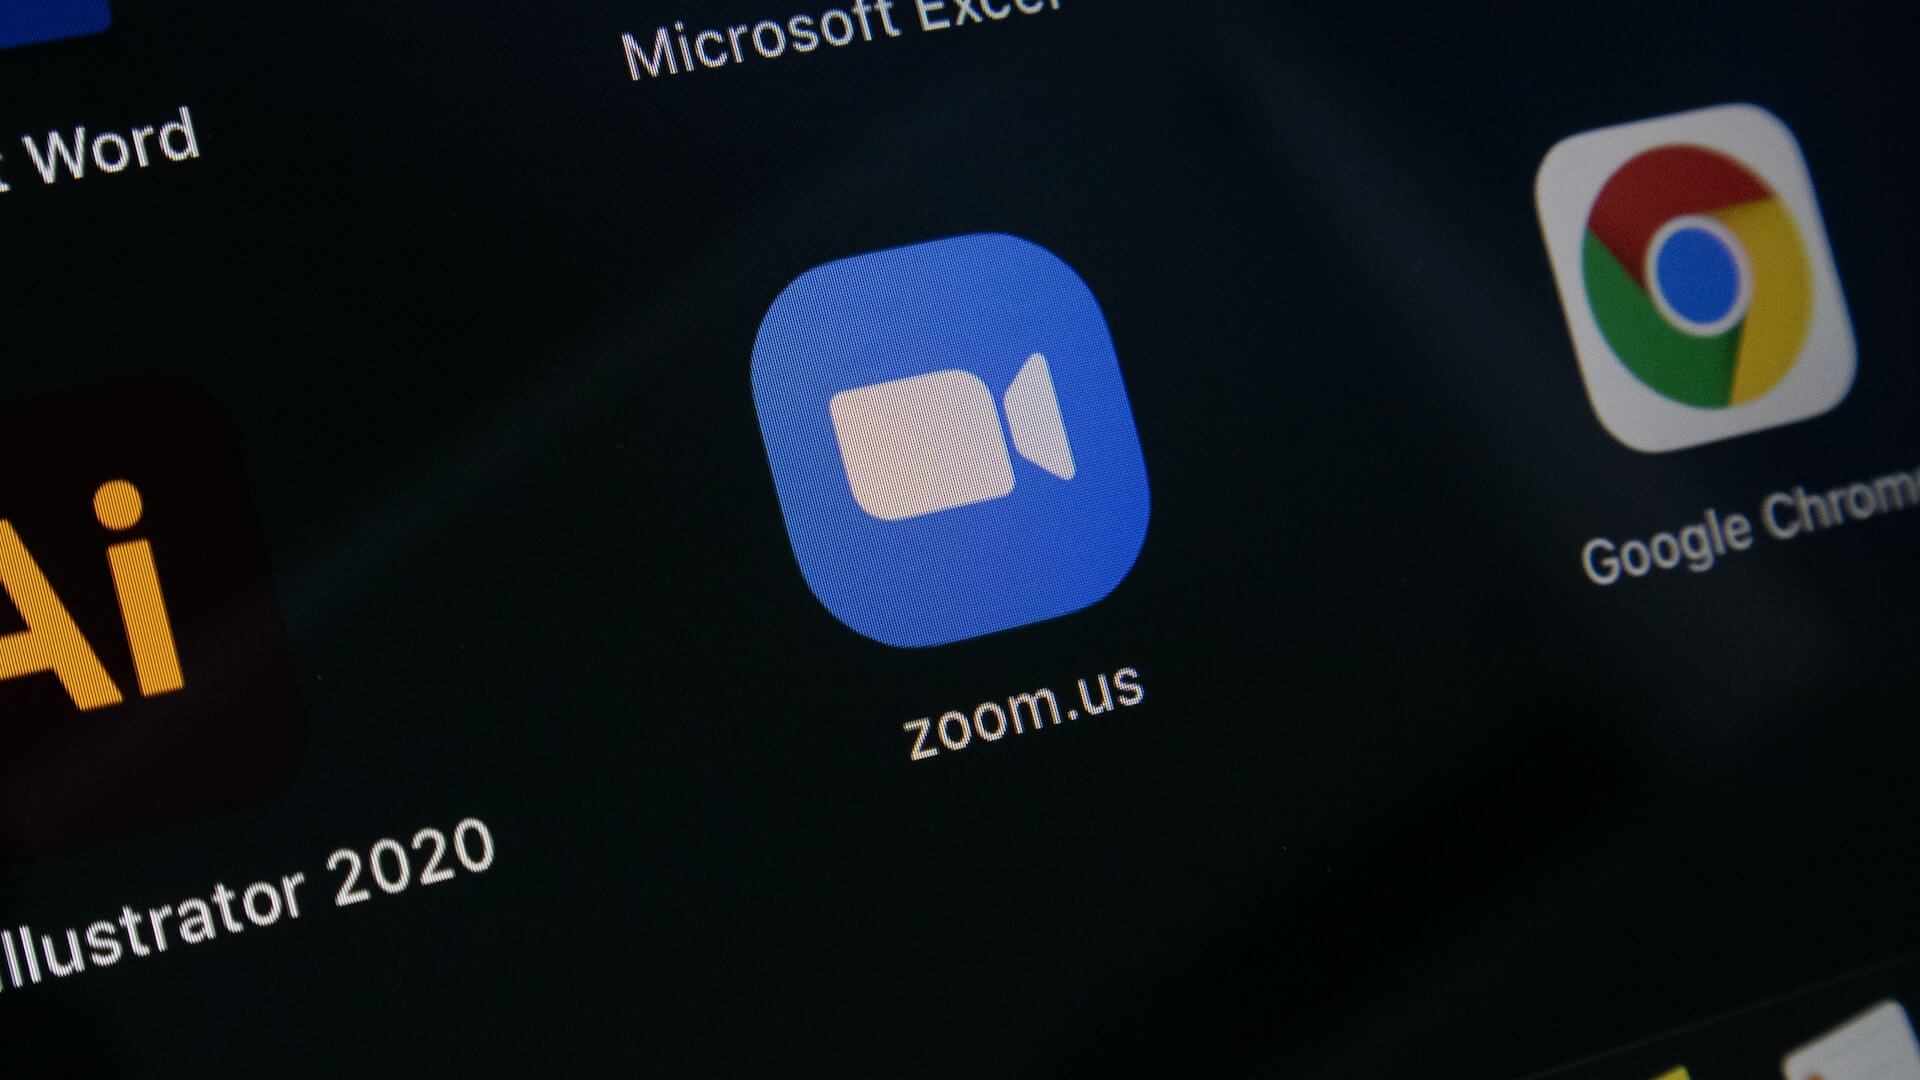 A screen showing the Zoom app